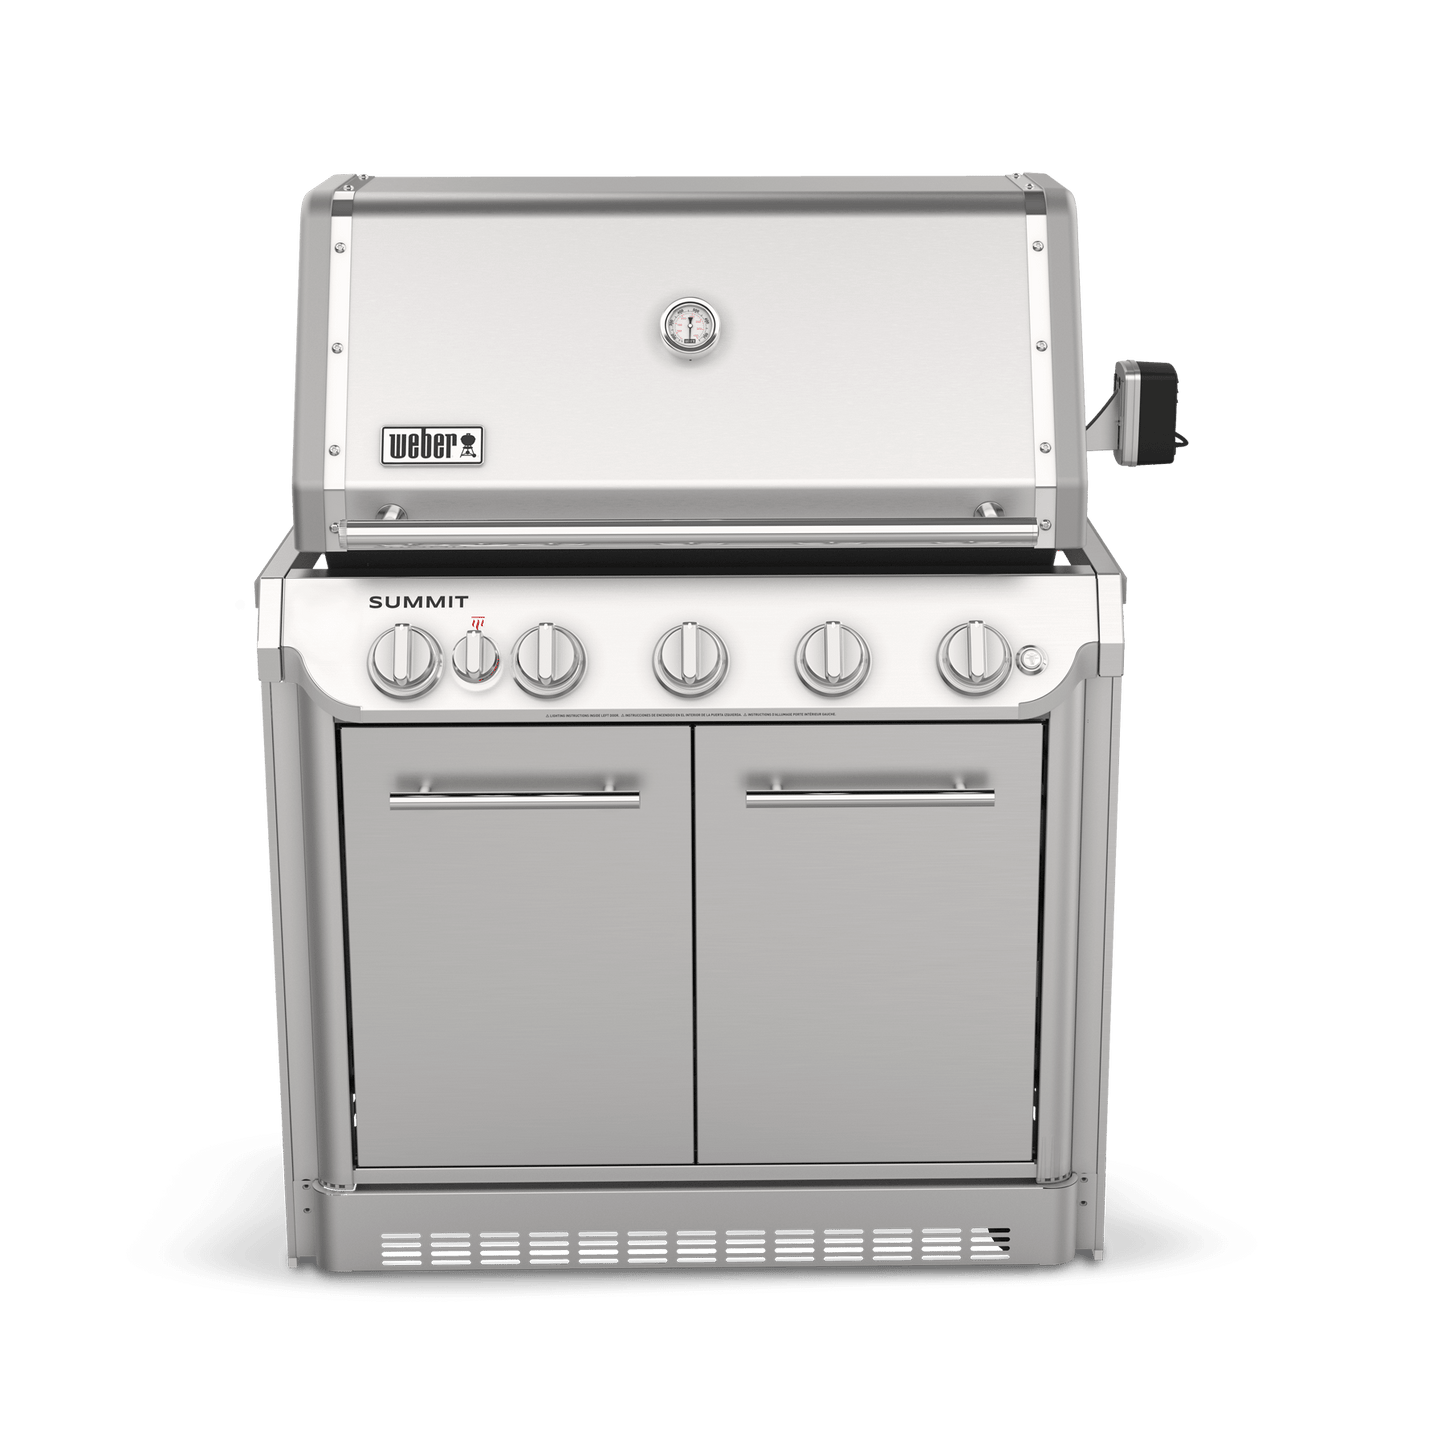 Weber 1500043 Summit® Sb38 S Built-In Gas Grill (Natural Gas) - Stainless Steel